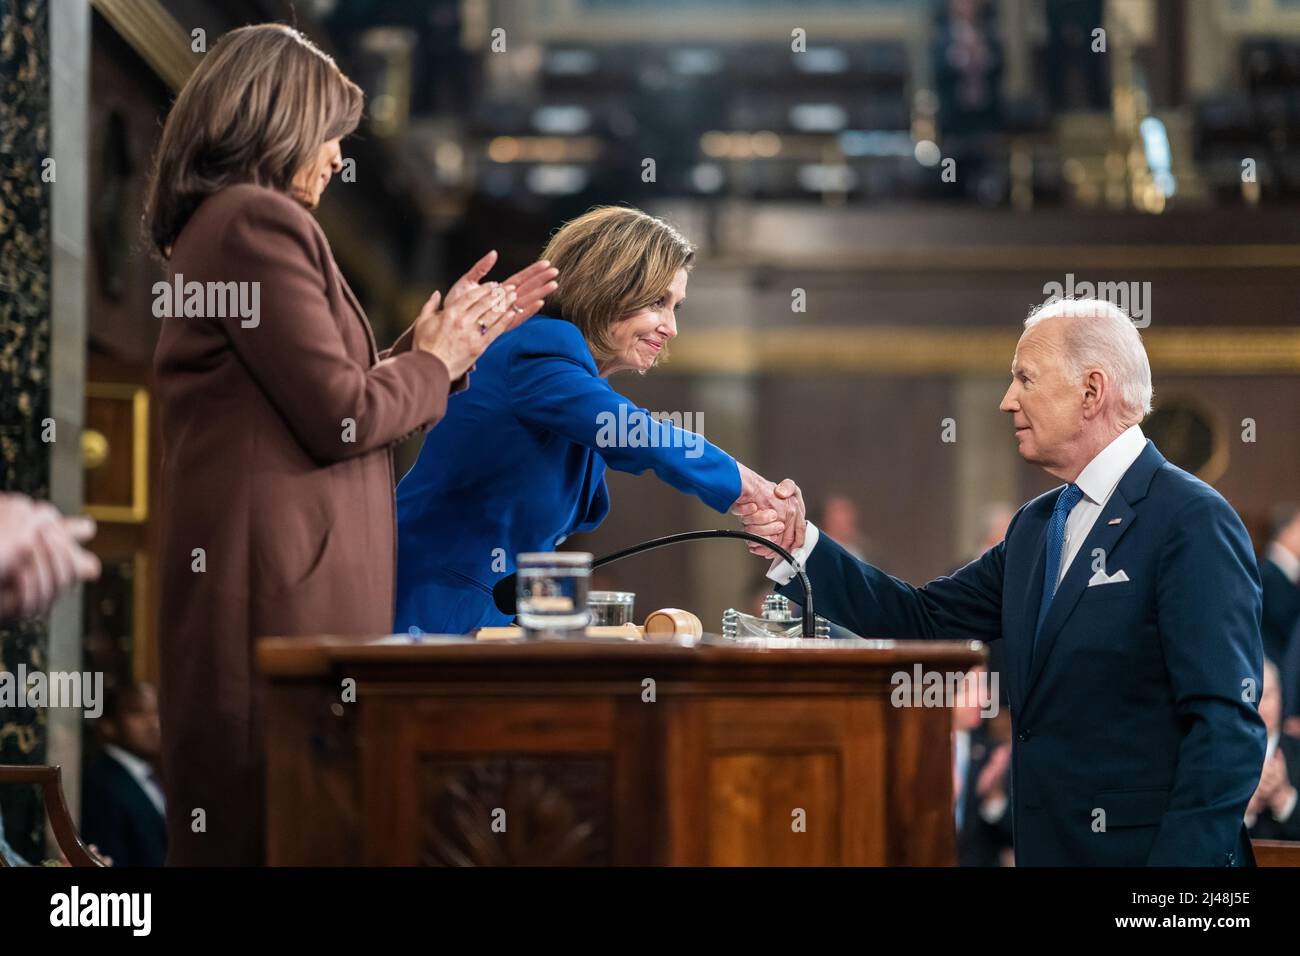 WASHINGTON DC, USA - 01 mARCH 2022 - US President Joe Biden shakes hands with House Speaker Nancy Pelosi after delivering his State of the Union addre Stock Photo